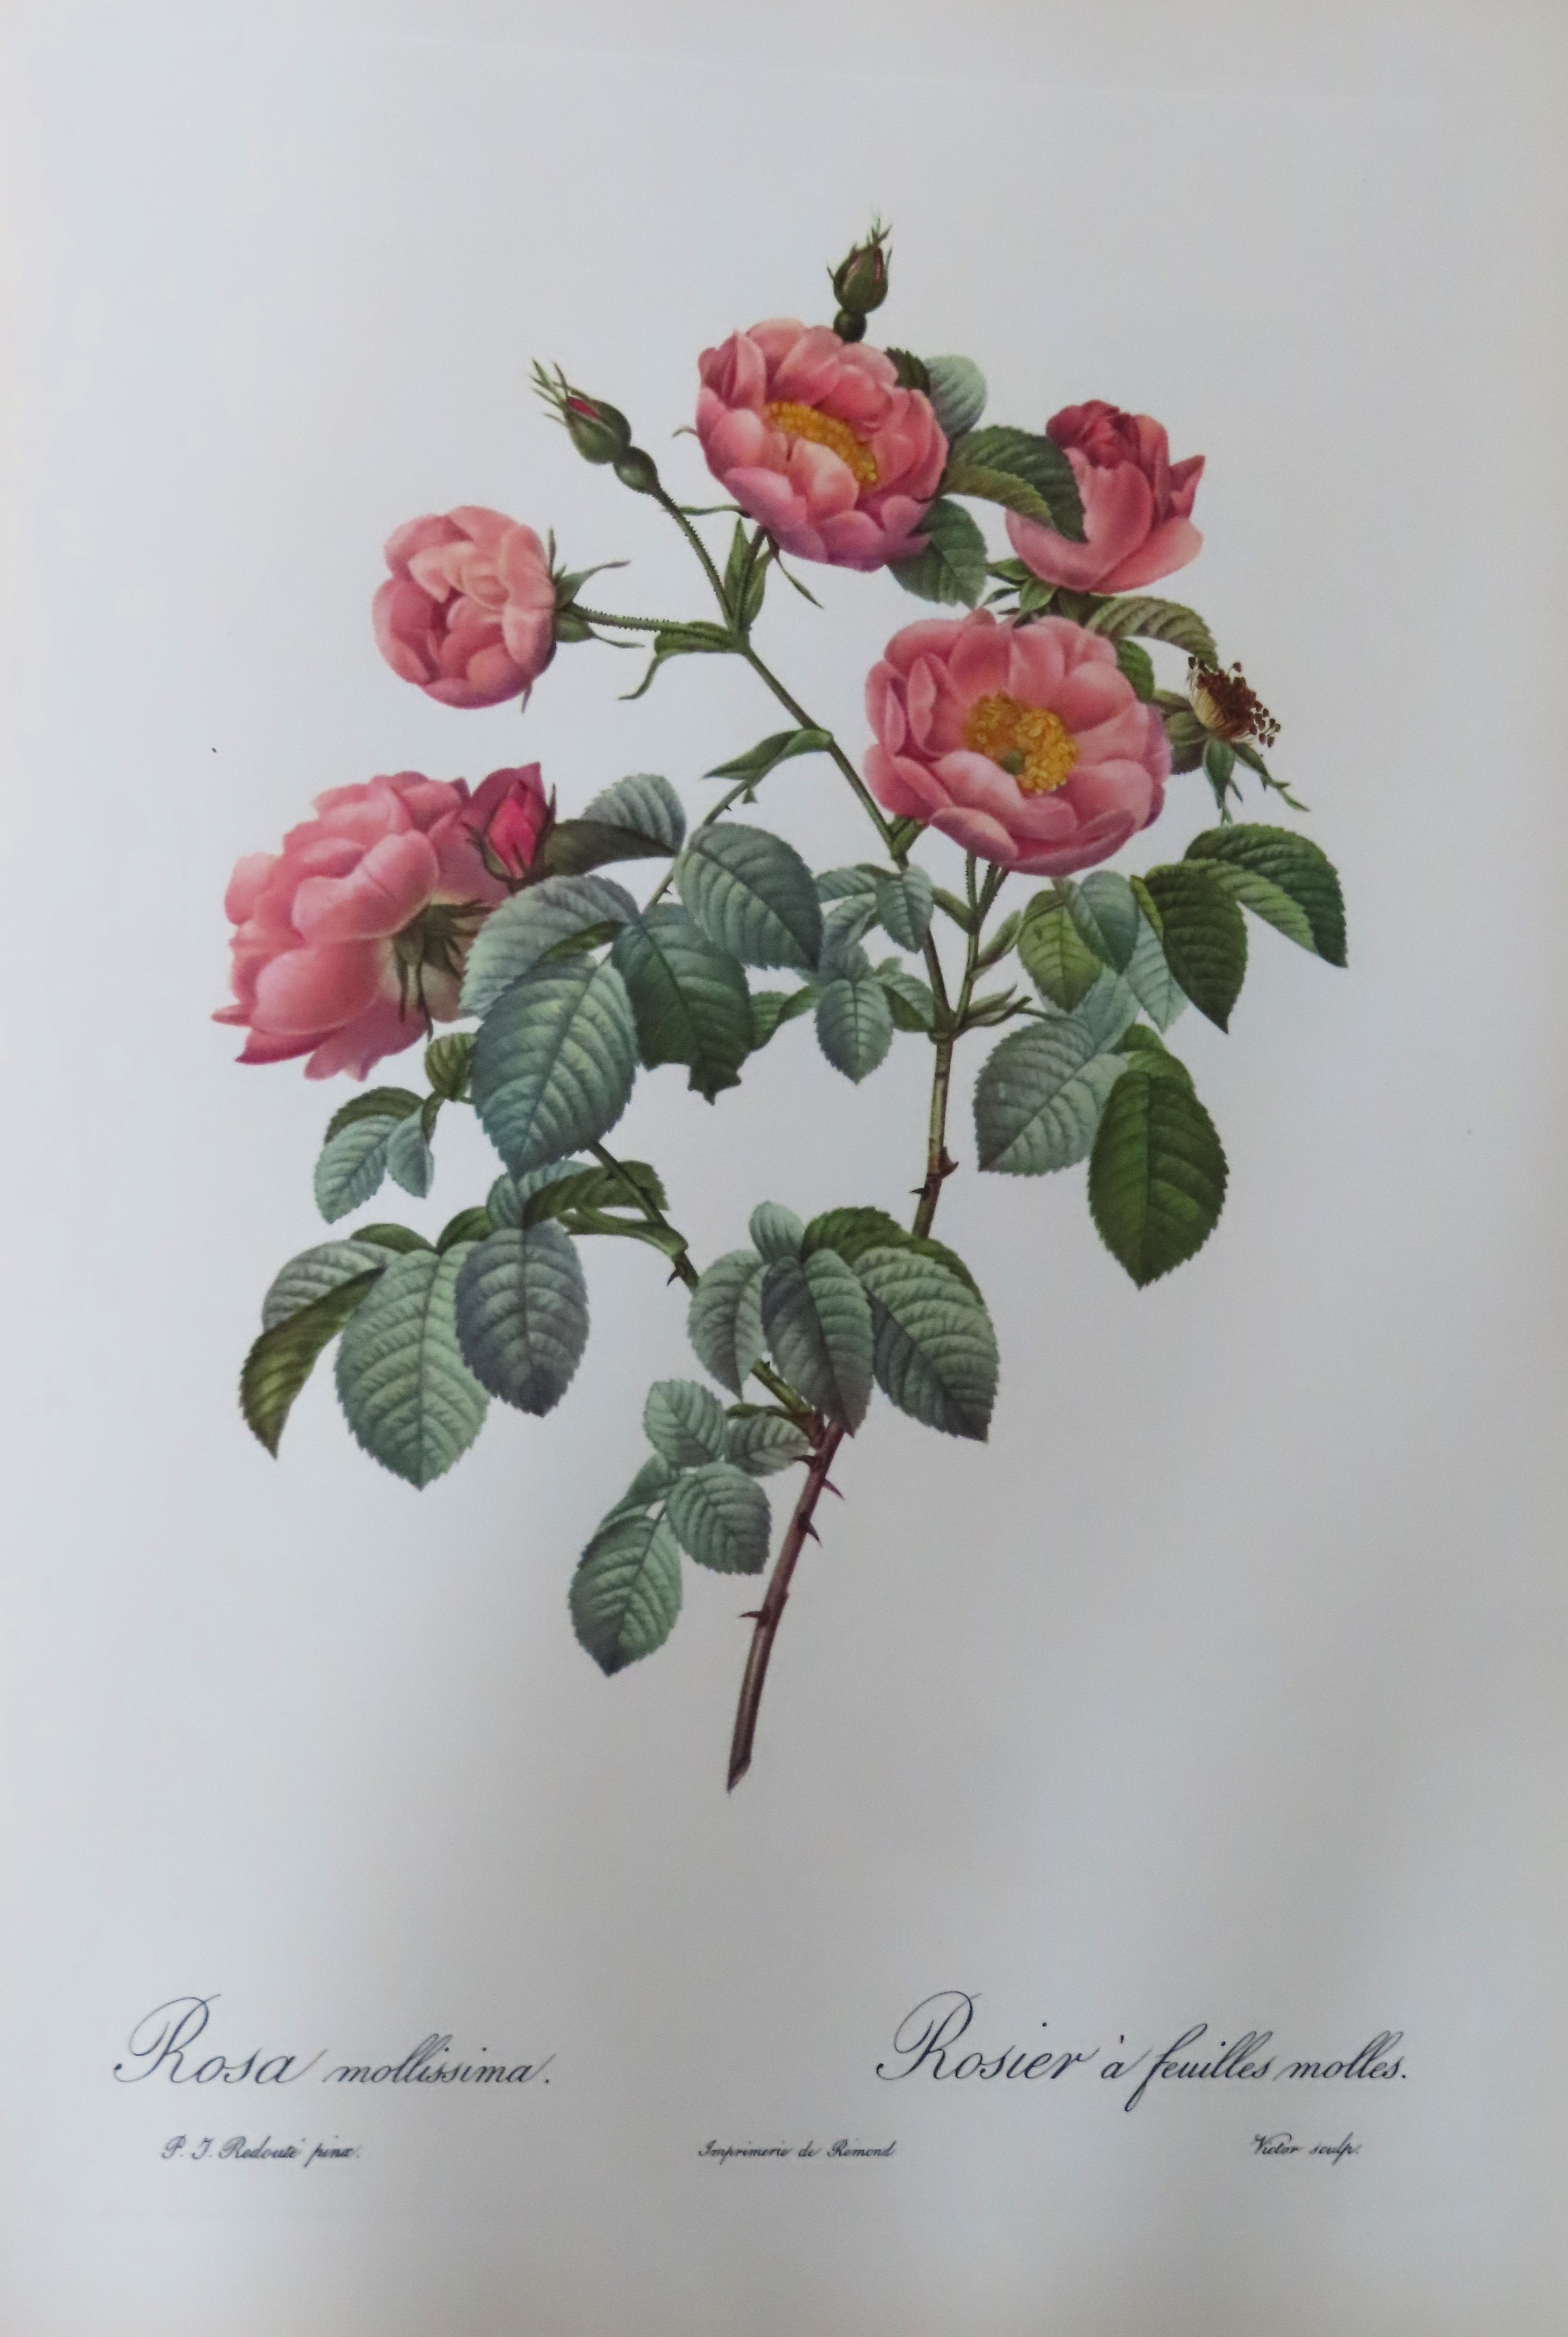 Pierre Joseph Redoute aerial press set of polychrome plates - Roses Reasonable used condition - Image 3 of 3